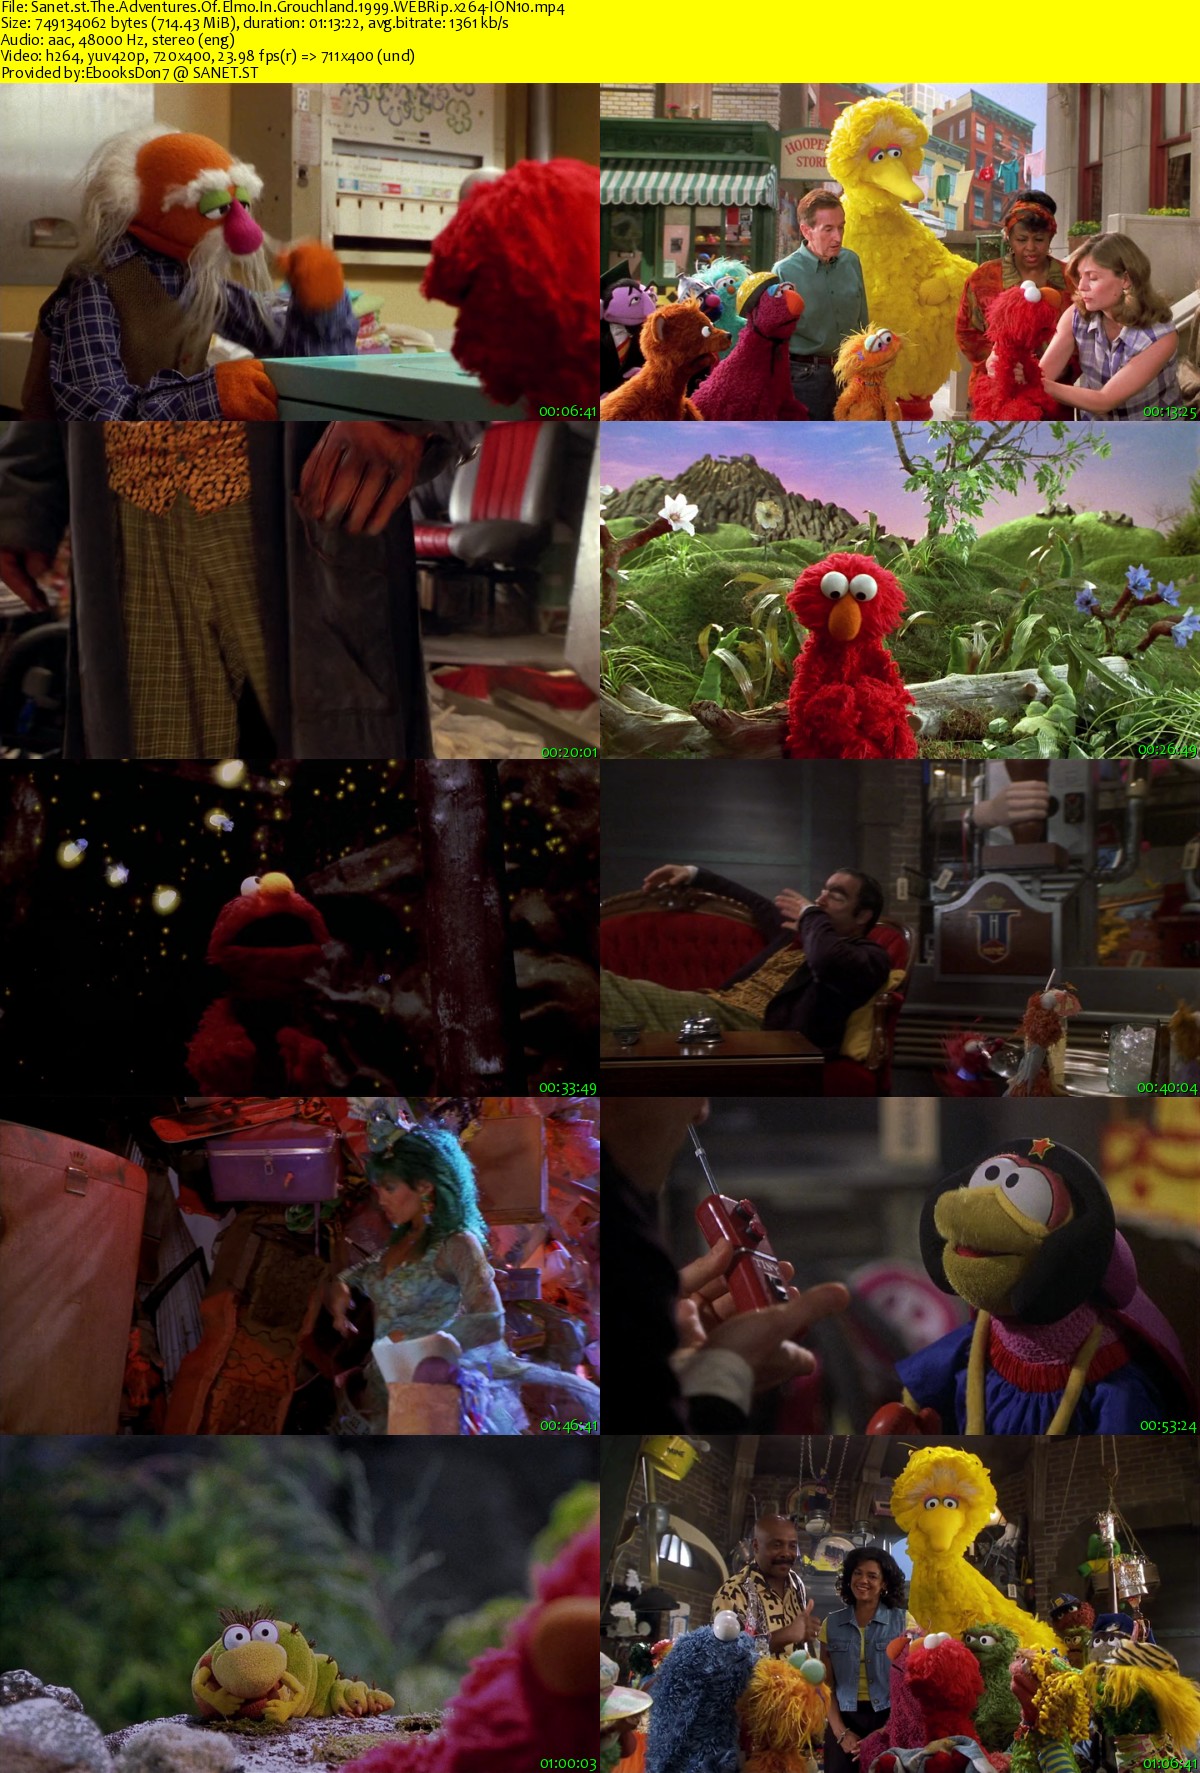 The Adventures Of Elmo In Grouchland 1999 WEBRip x264-ION10 - SoftArchive